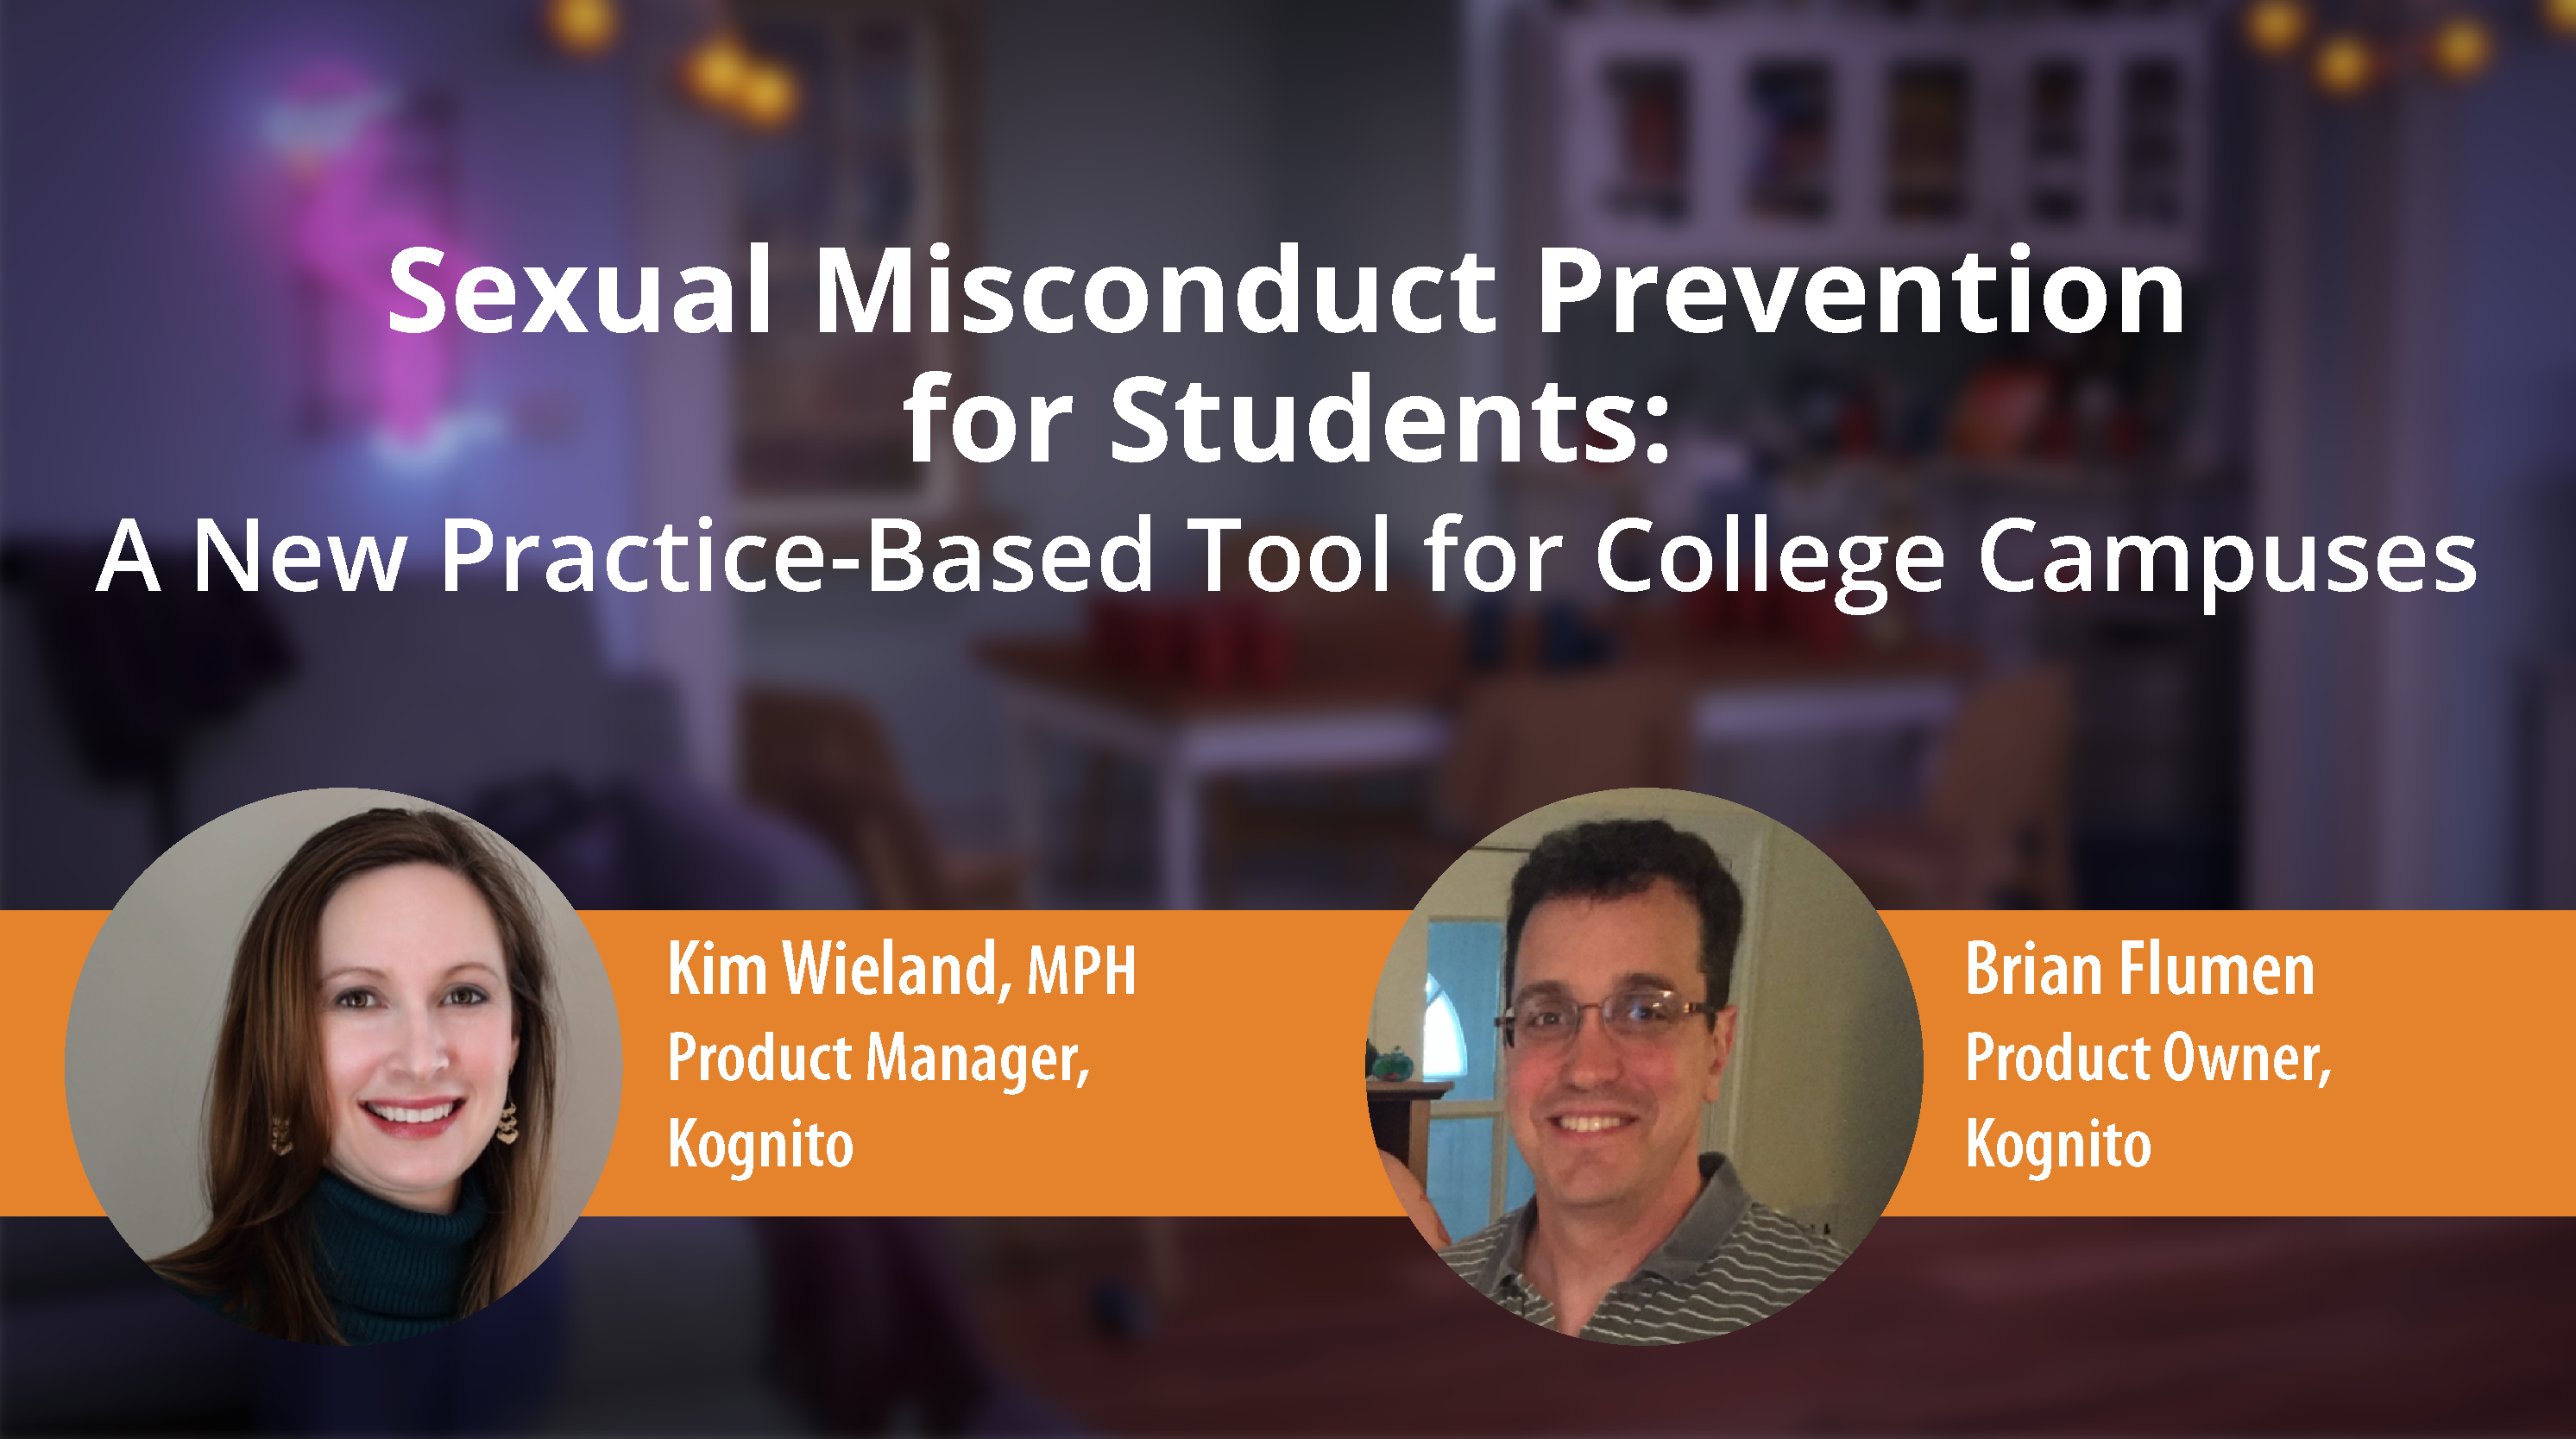 Sexual Misconduct Prevention for Students: A New Practice-Based Tool for College Campuses